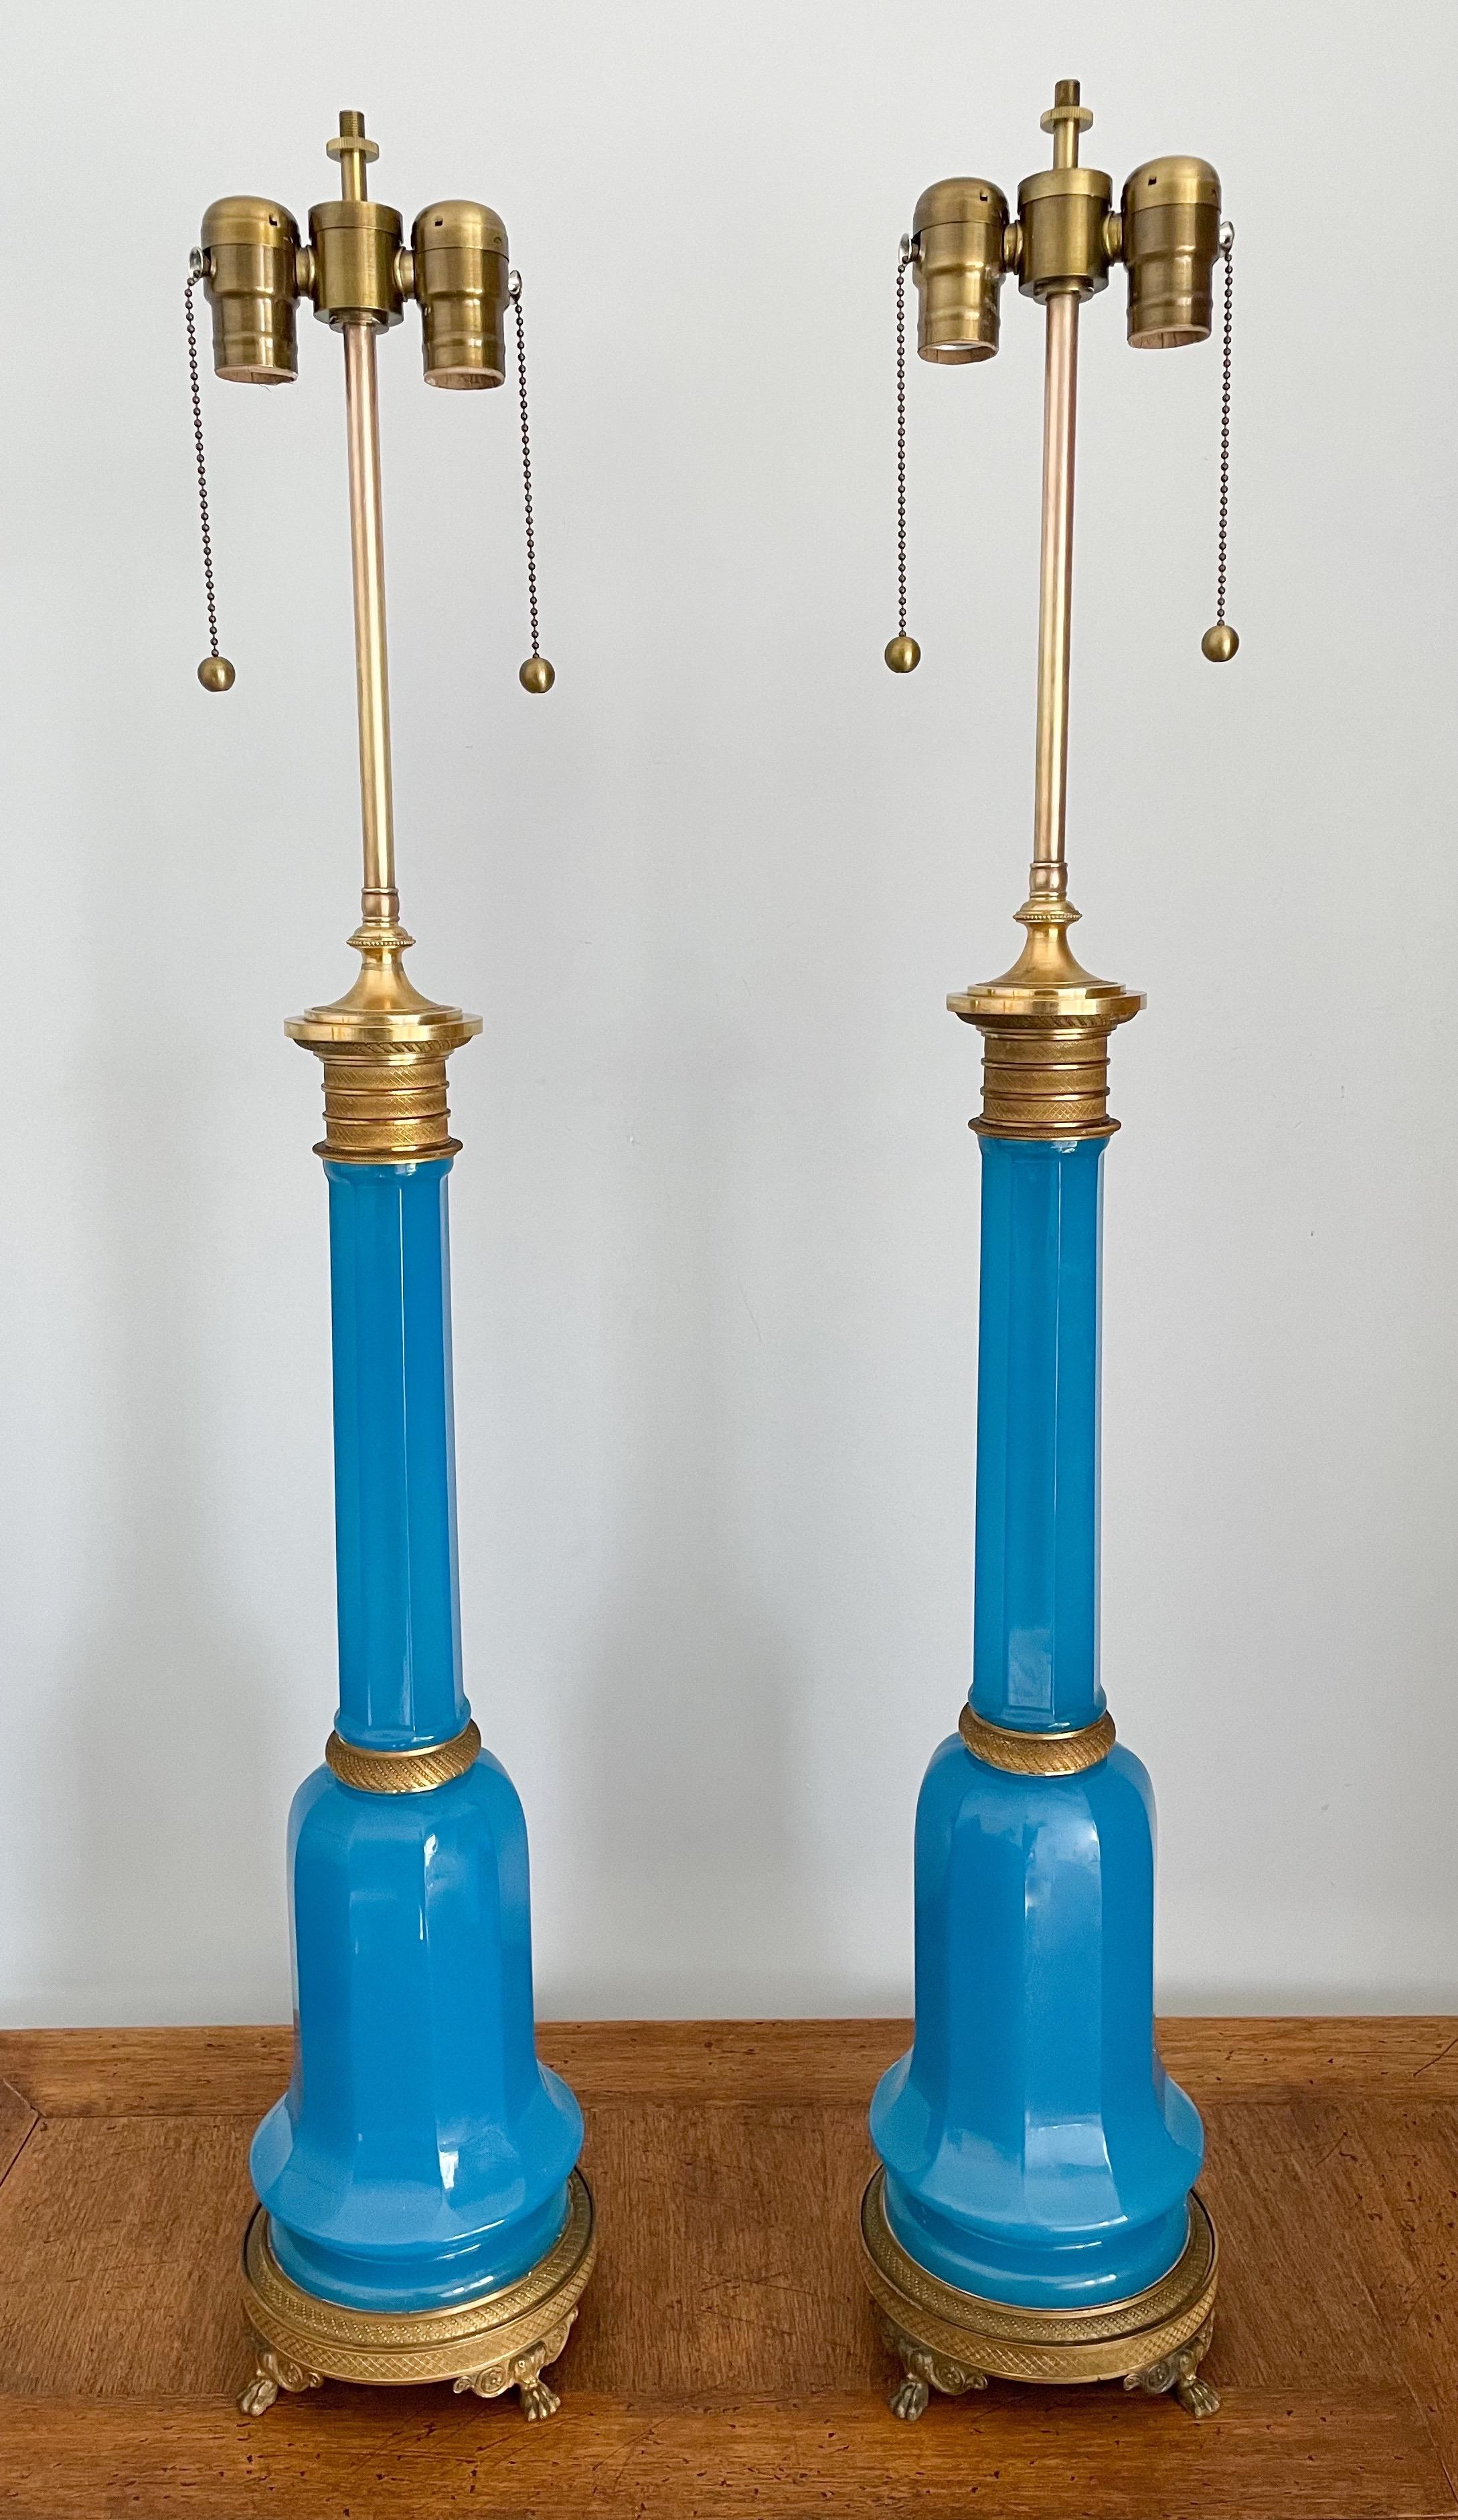 Wonderful, pair of antique French blue opaline lamps in the Neoclassical style.

Each lamp consists of an opaline glass body in a beautiful shade of blue and fine bronze ormolu decorations. 

The lamps are newly wired and require 2 Edison-base